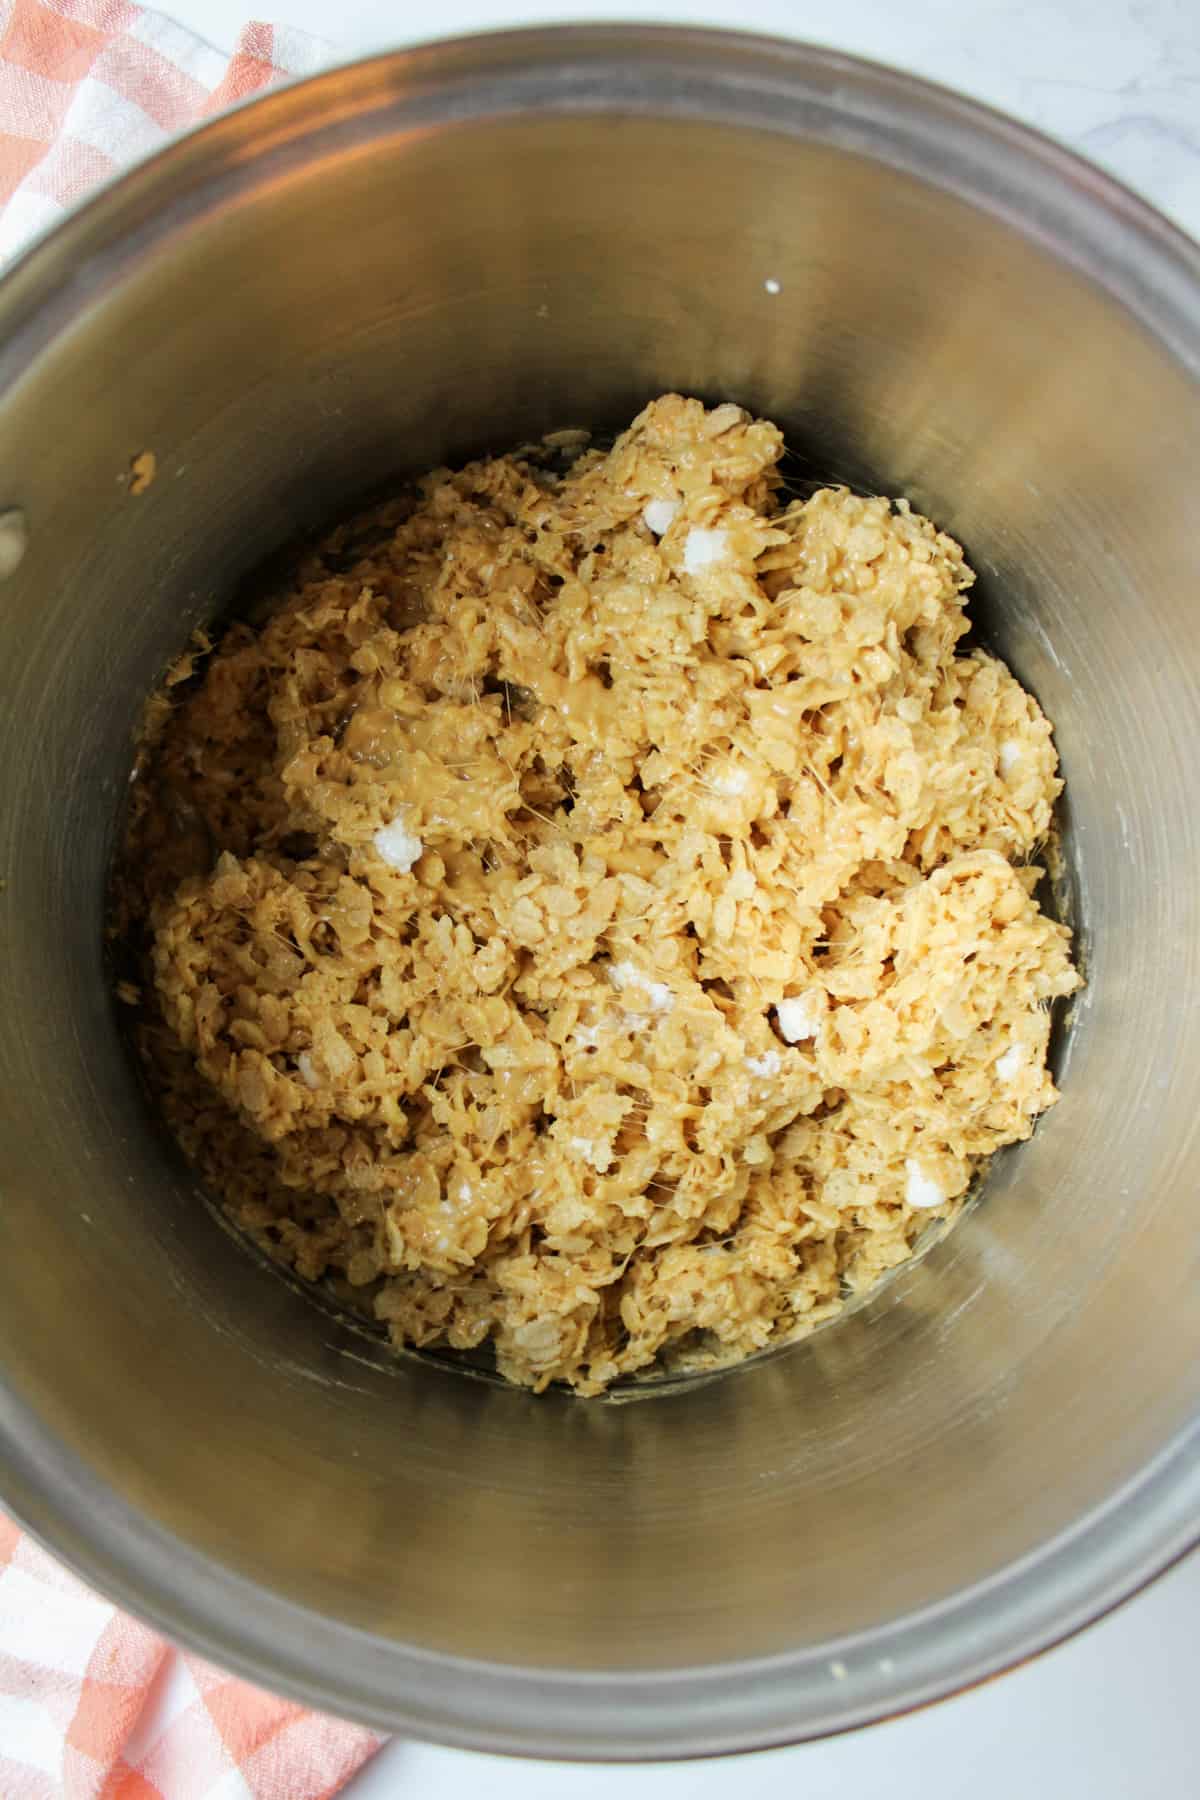 peanut butter rice krispie cereal mixture in a pot